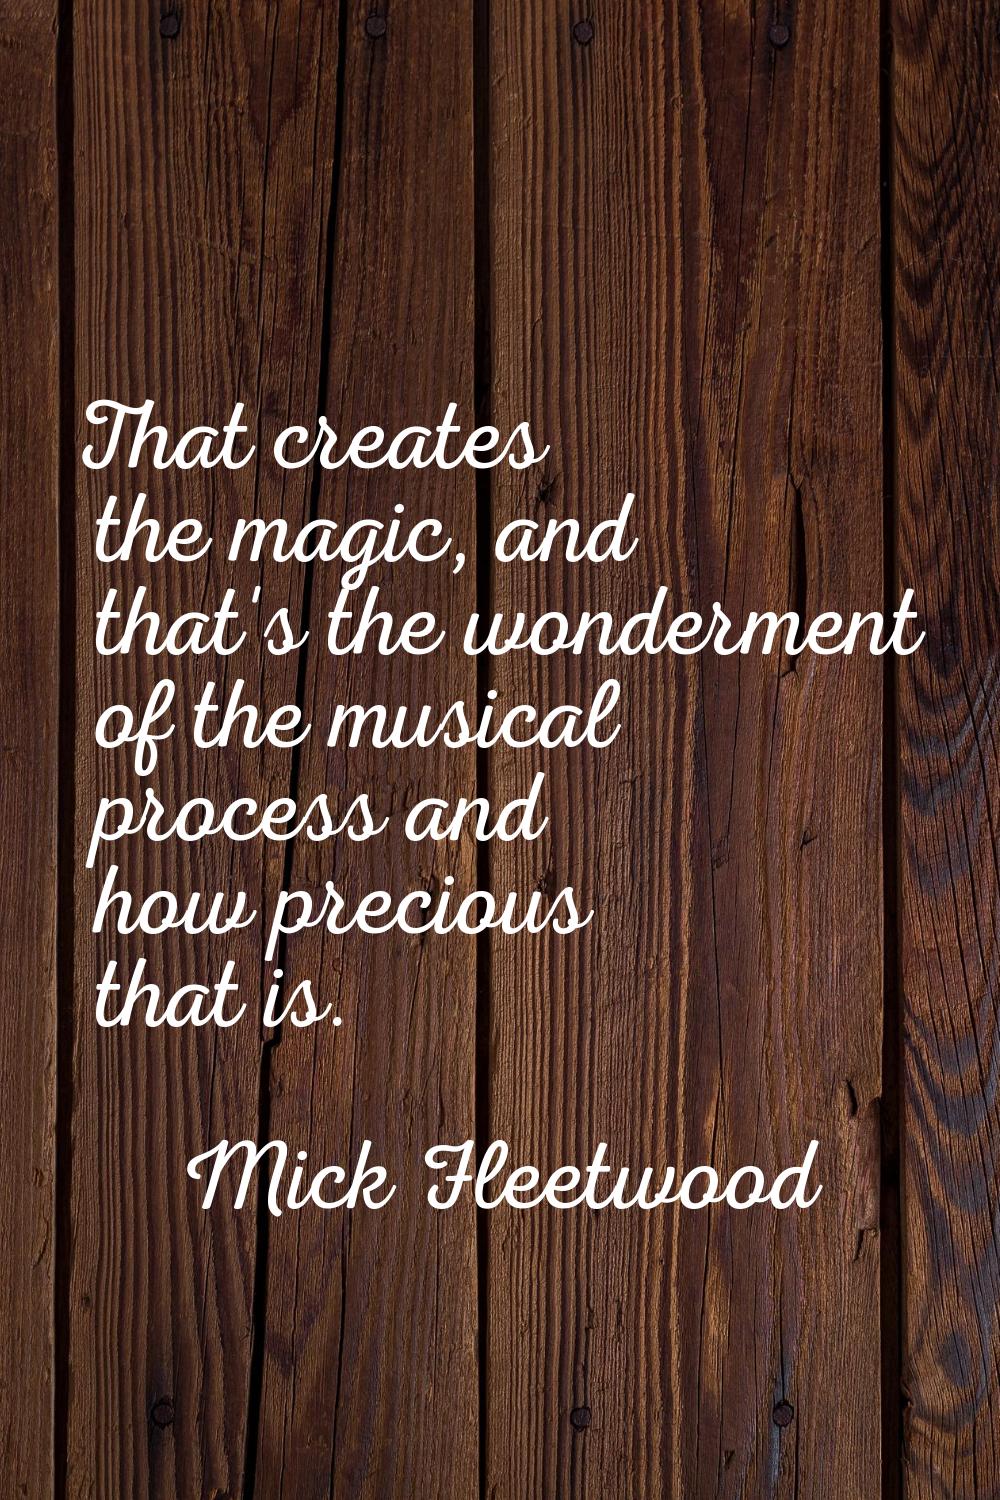 That creates the magic, and that's the wonderment of the musical process and how precious that is.